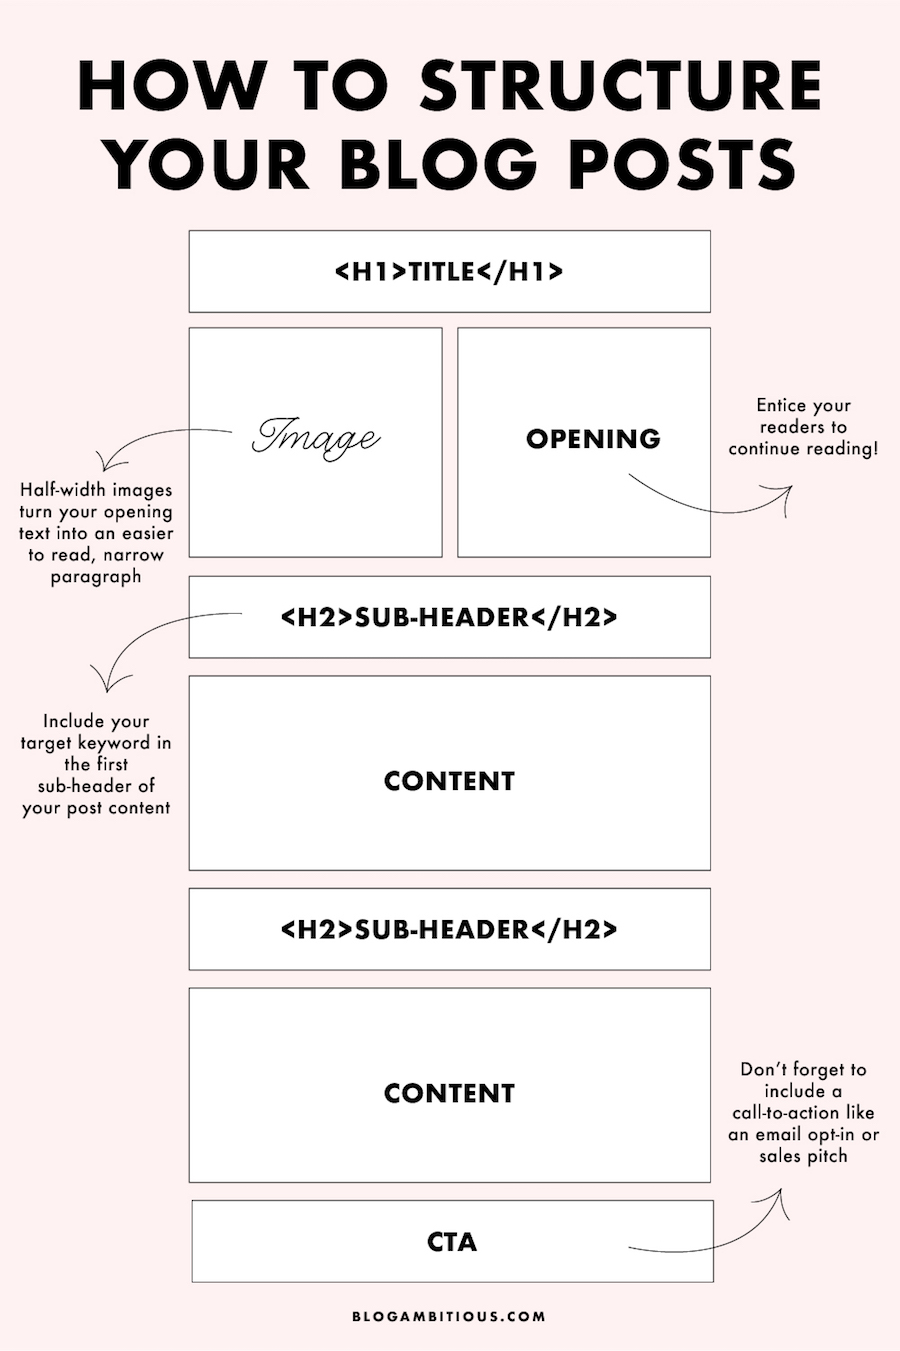 How to Write and Structure a Blog Post Your Readers and Google Will Love